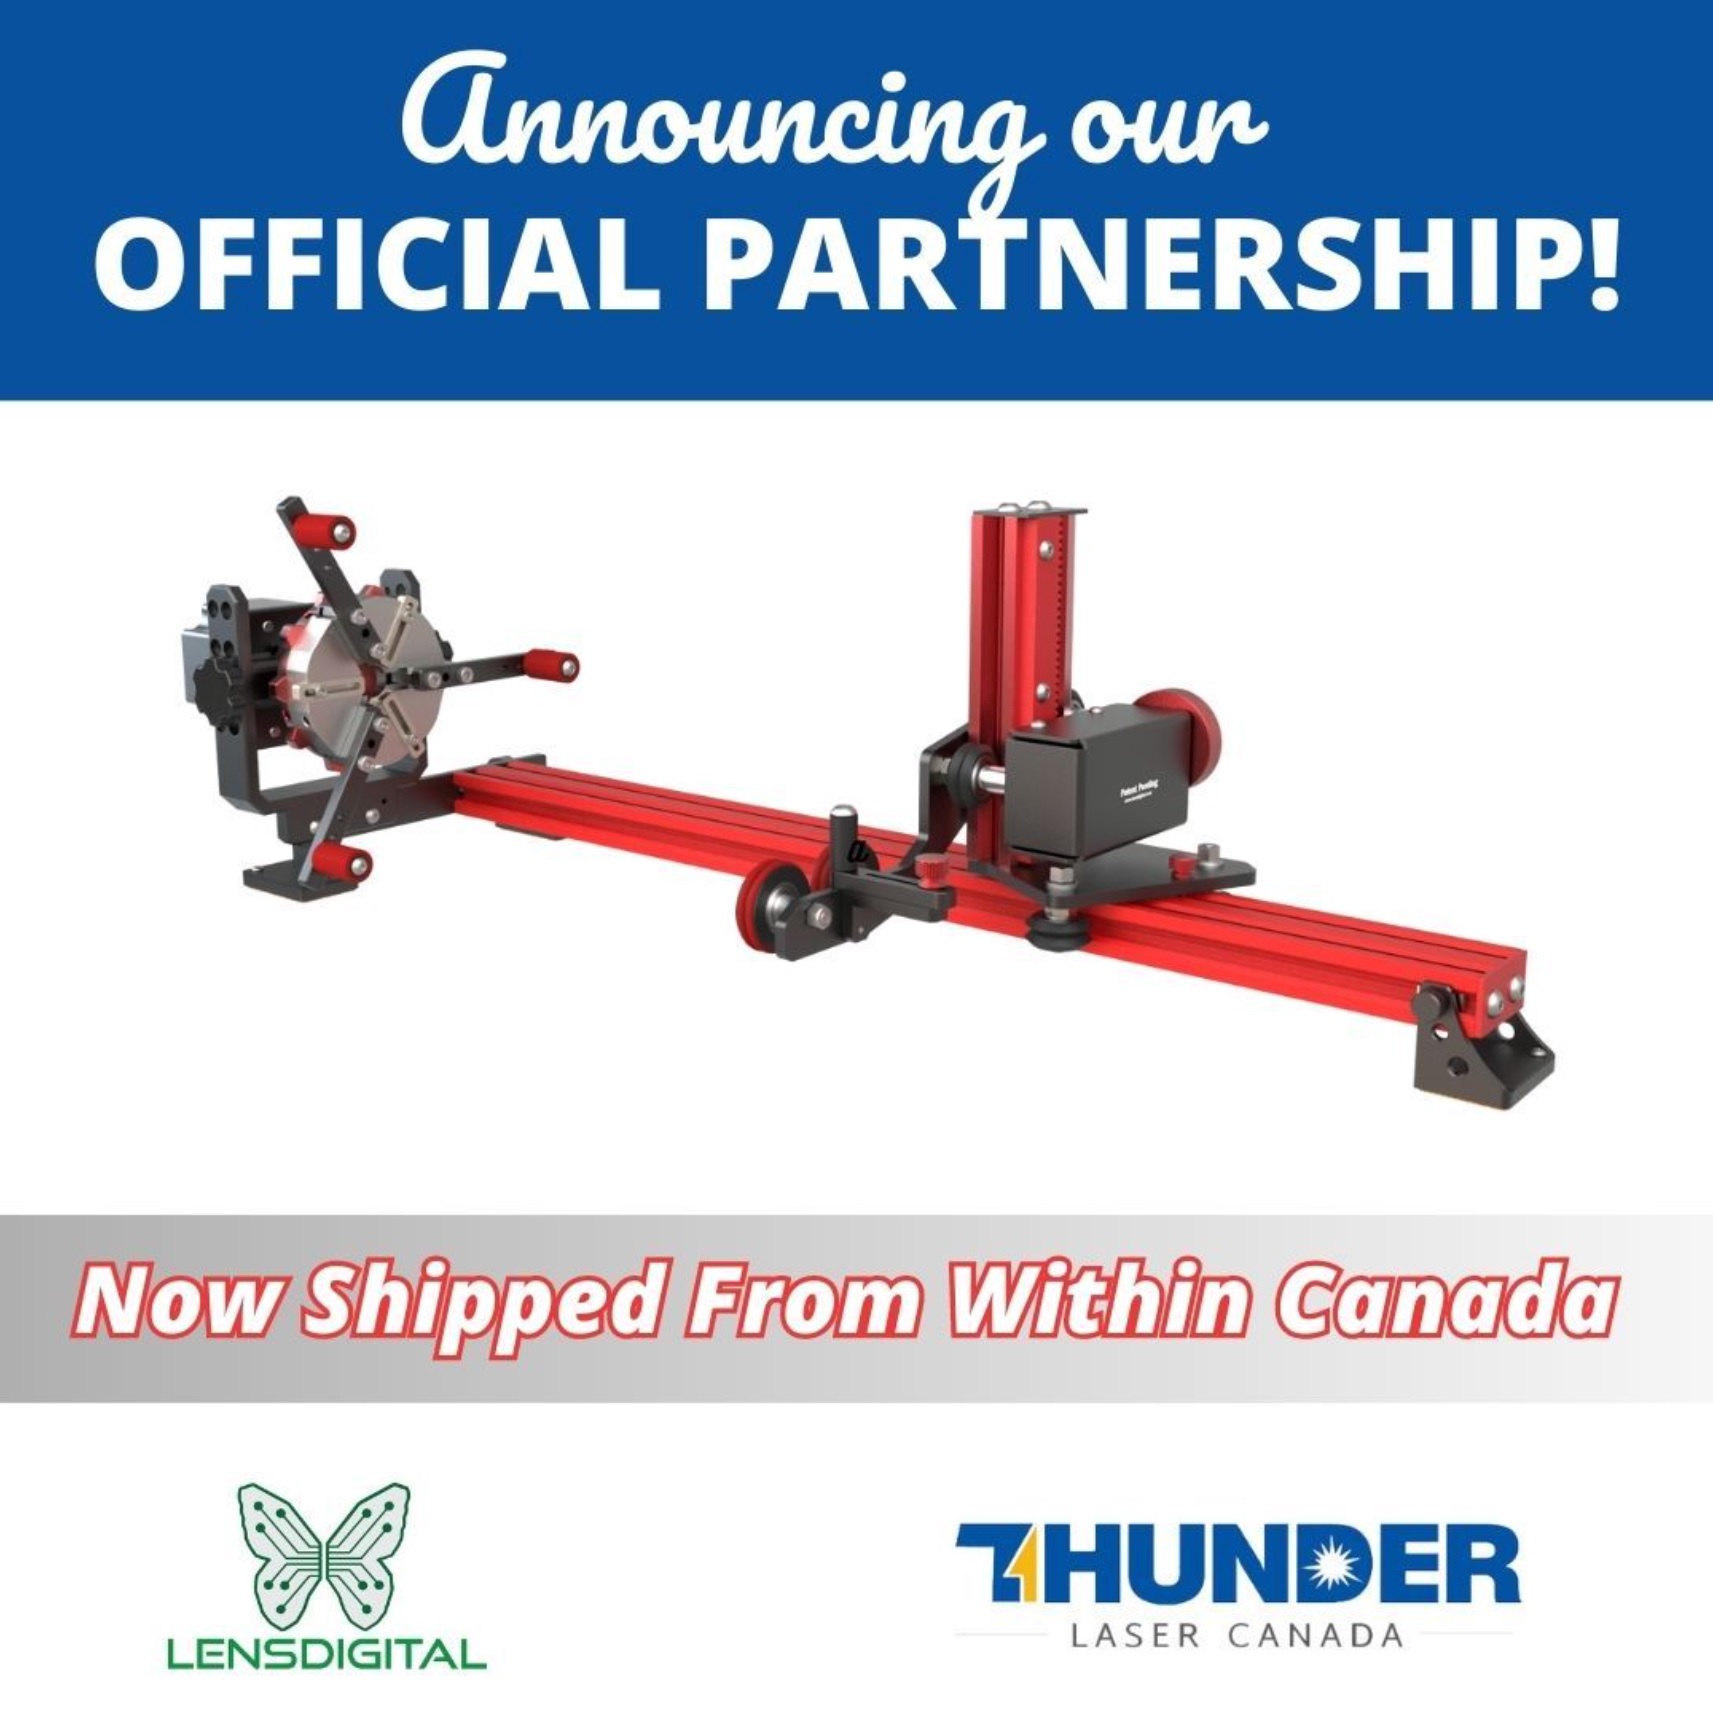 official partnership poster-now shipping from within canada Lens digital rotaries and thunder laser canada. image of a red metal rotary for a laser cutter with logos of Lens Digital and Thunder Laser Canada